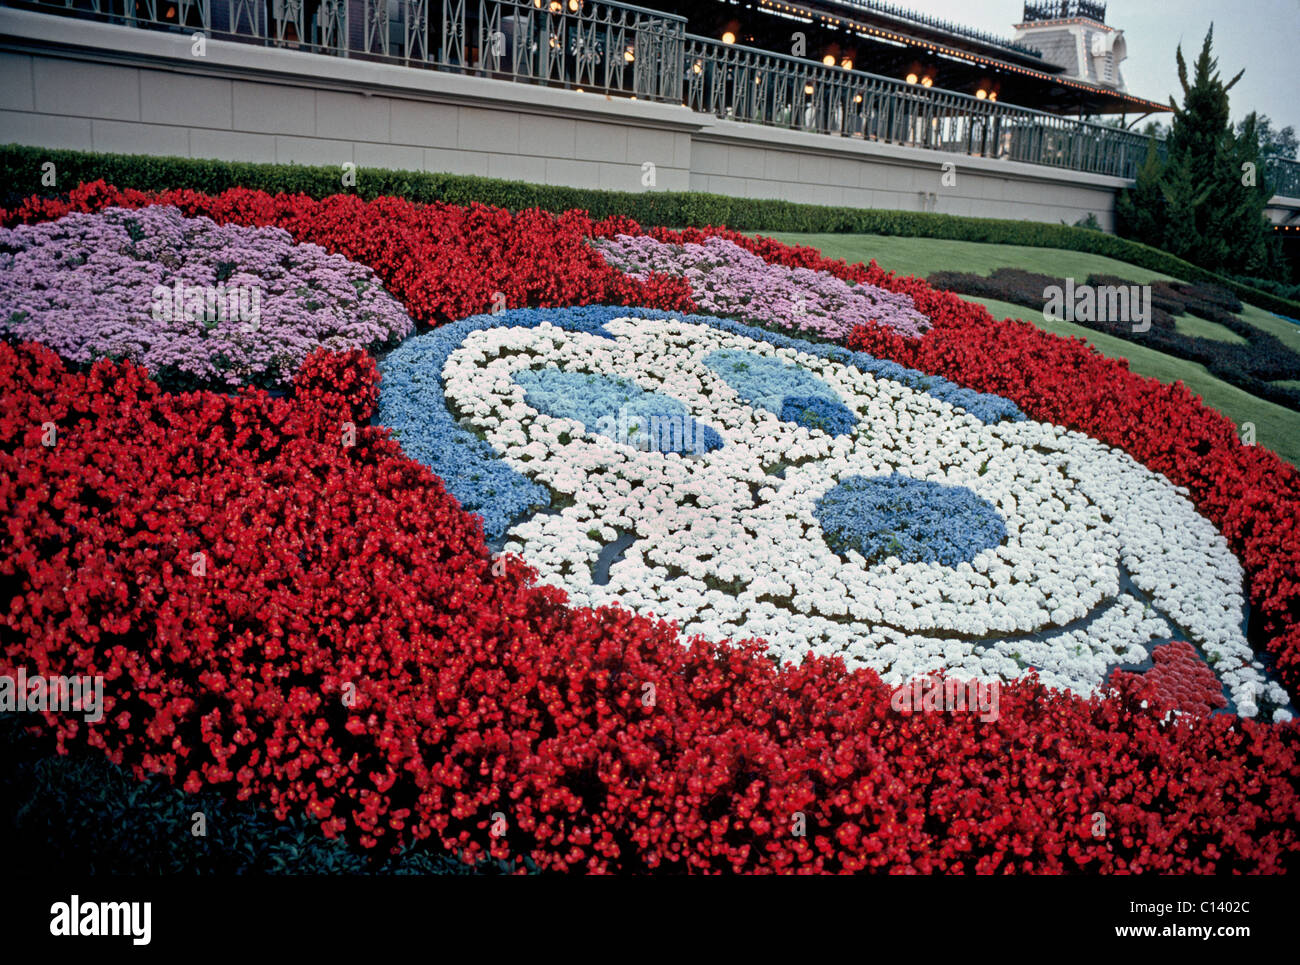 The well-known face of cartoon character Mickey Mouse is created with multicolored flowers planted at Walt Disney World in Orlando, Florida, USA. Stock Photo